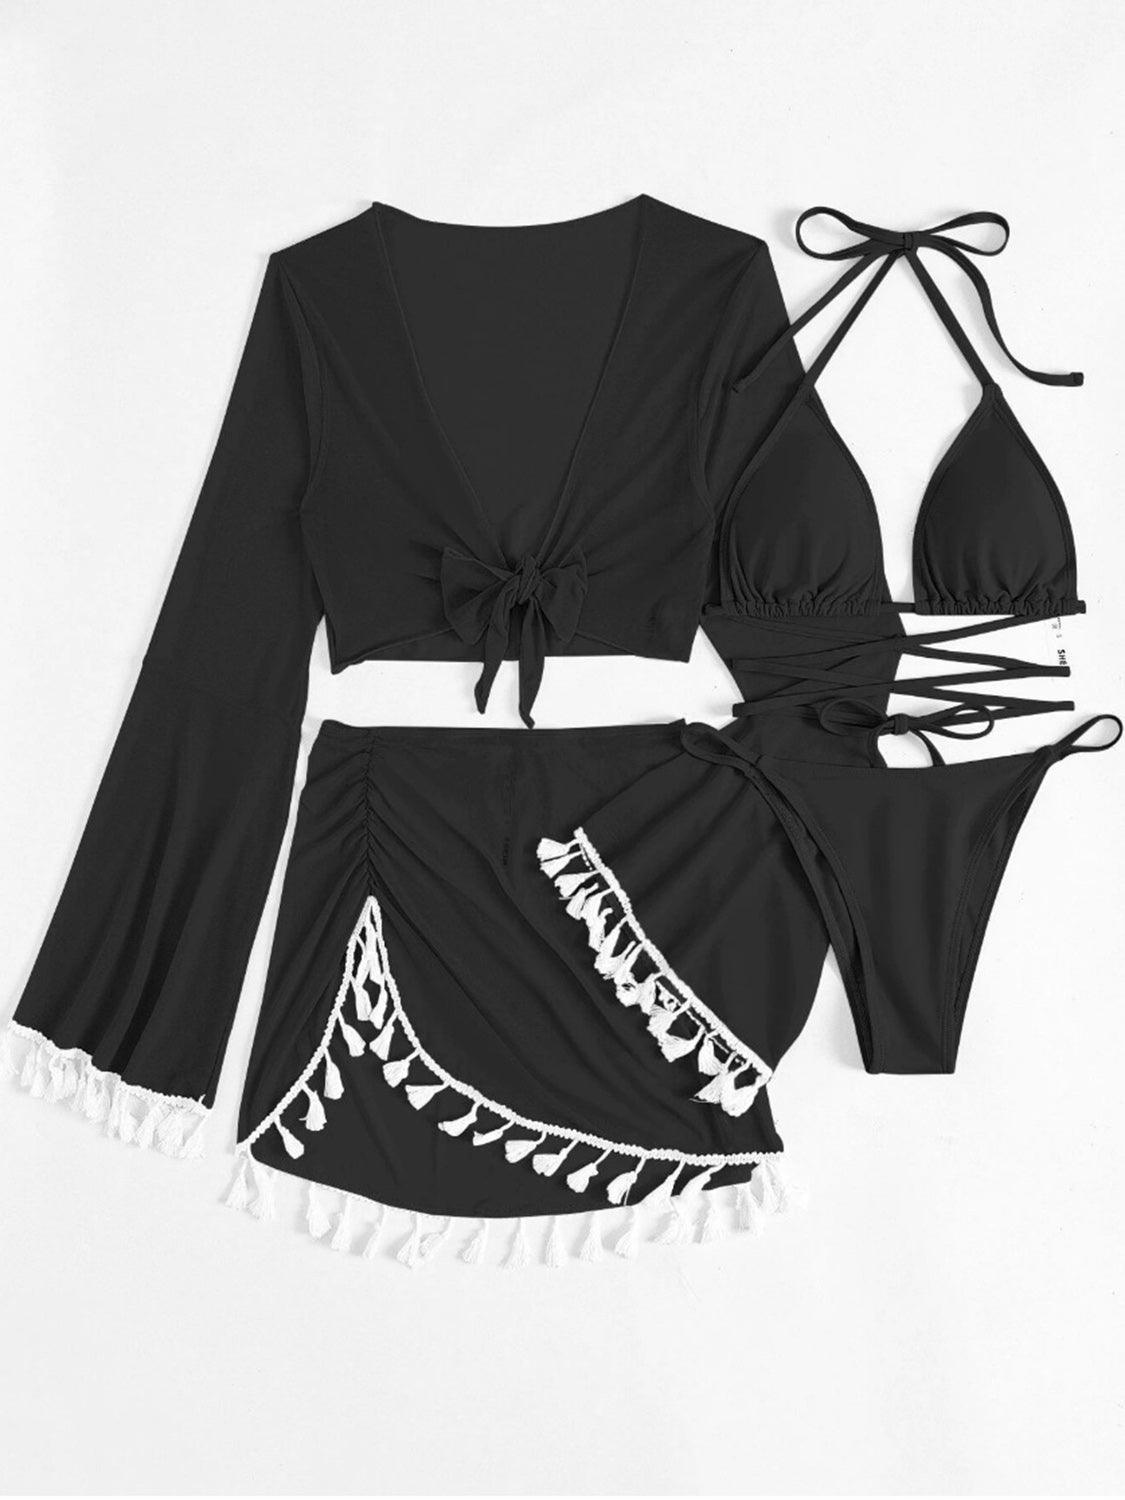 a black bikinisuit with white trims and a halter top